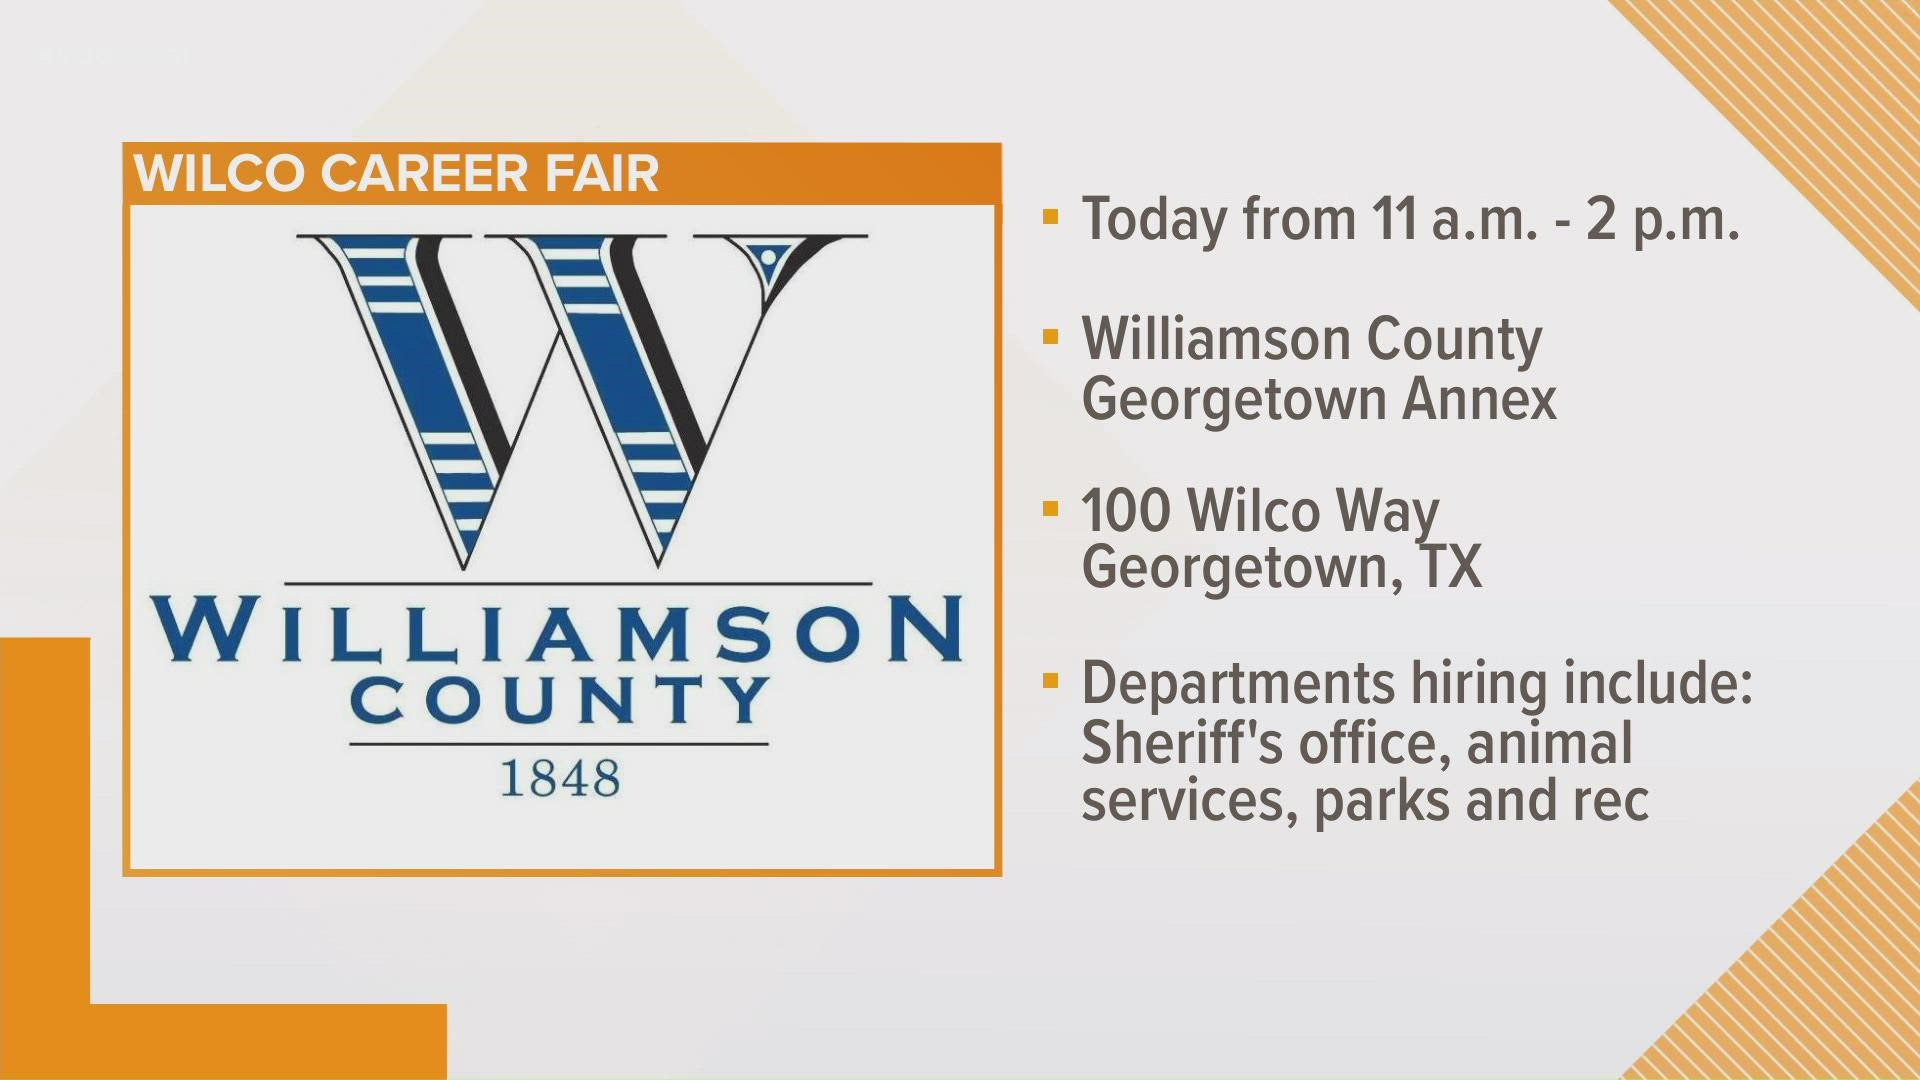 Williamson County is hosting a career fair at the Williamson County Georgetown Annex on Monday.